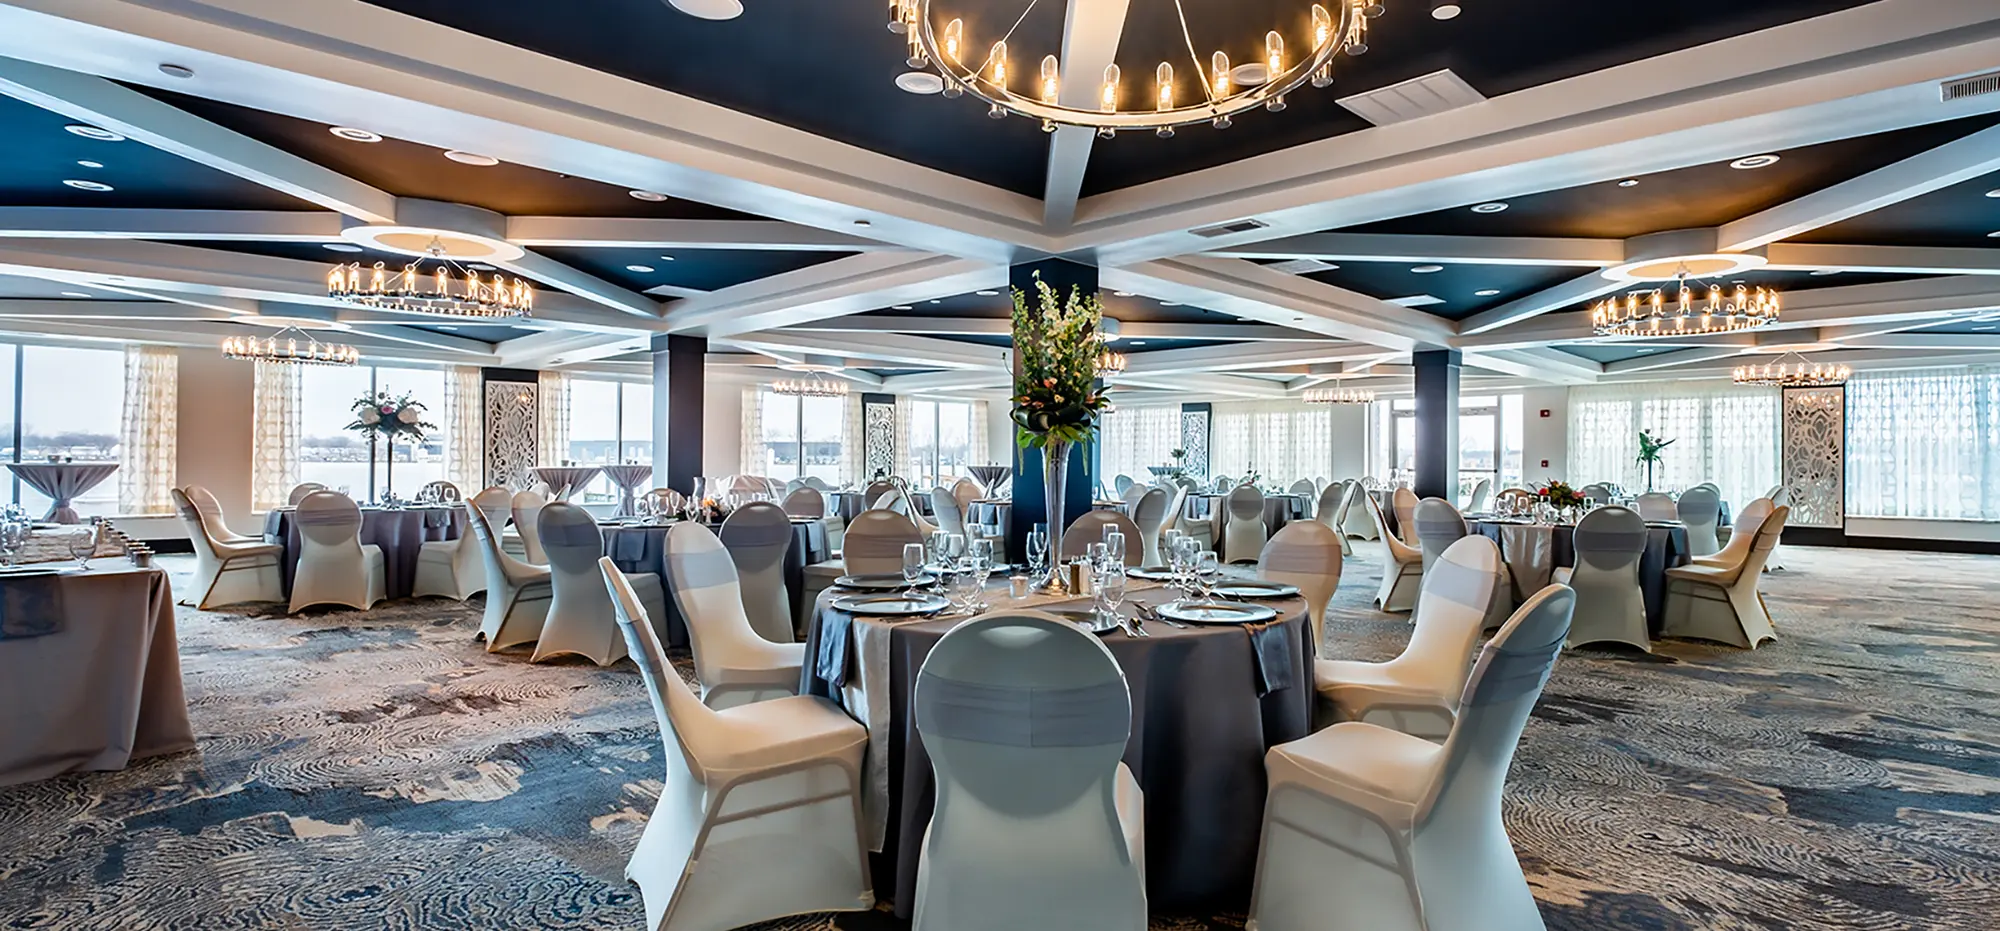 Large room area with dark grey tables all around, dark tan chairs, glass cups, plates, forks, knifes, big circular glass lit chandeliers, and many other wedding assortment objects inside at the Holiday Inn Spring Lake-Grand Haven venue